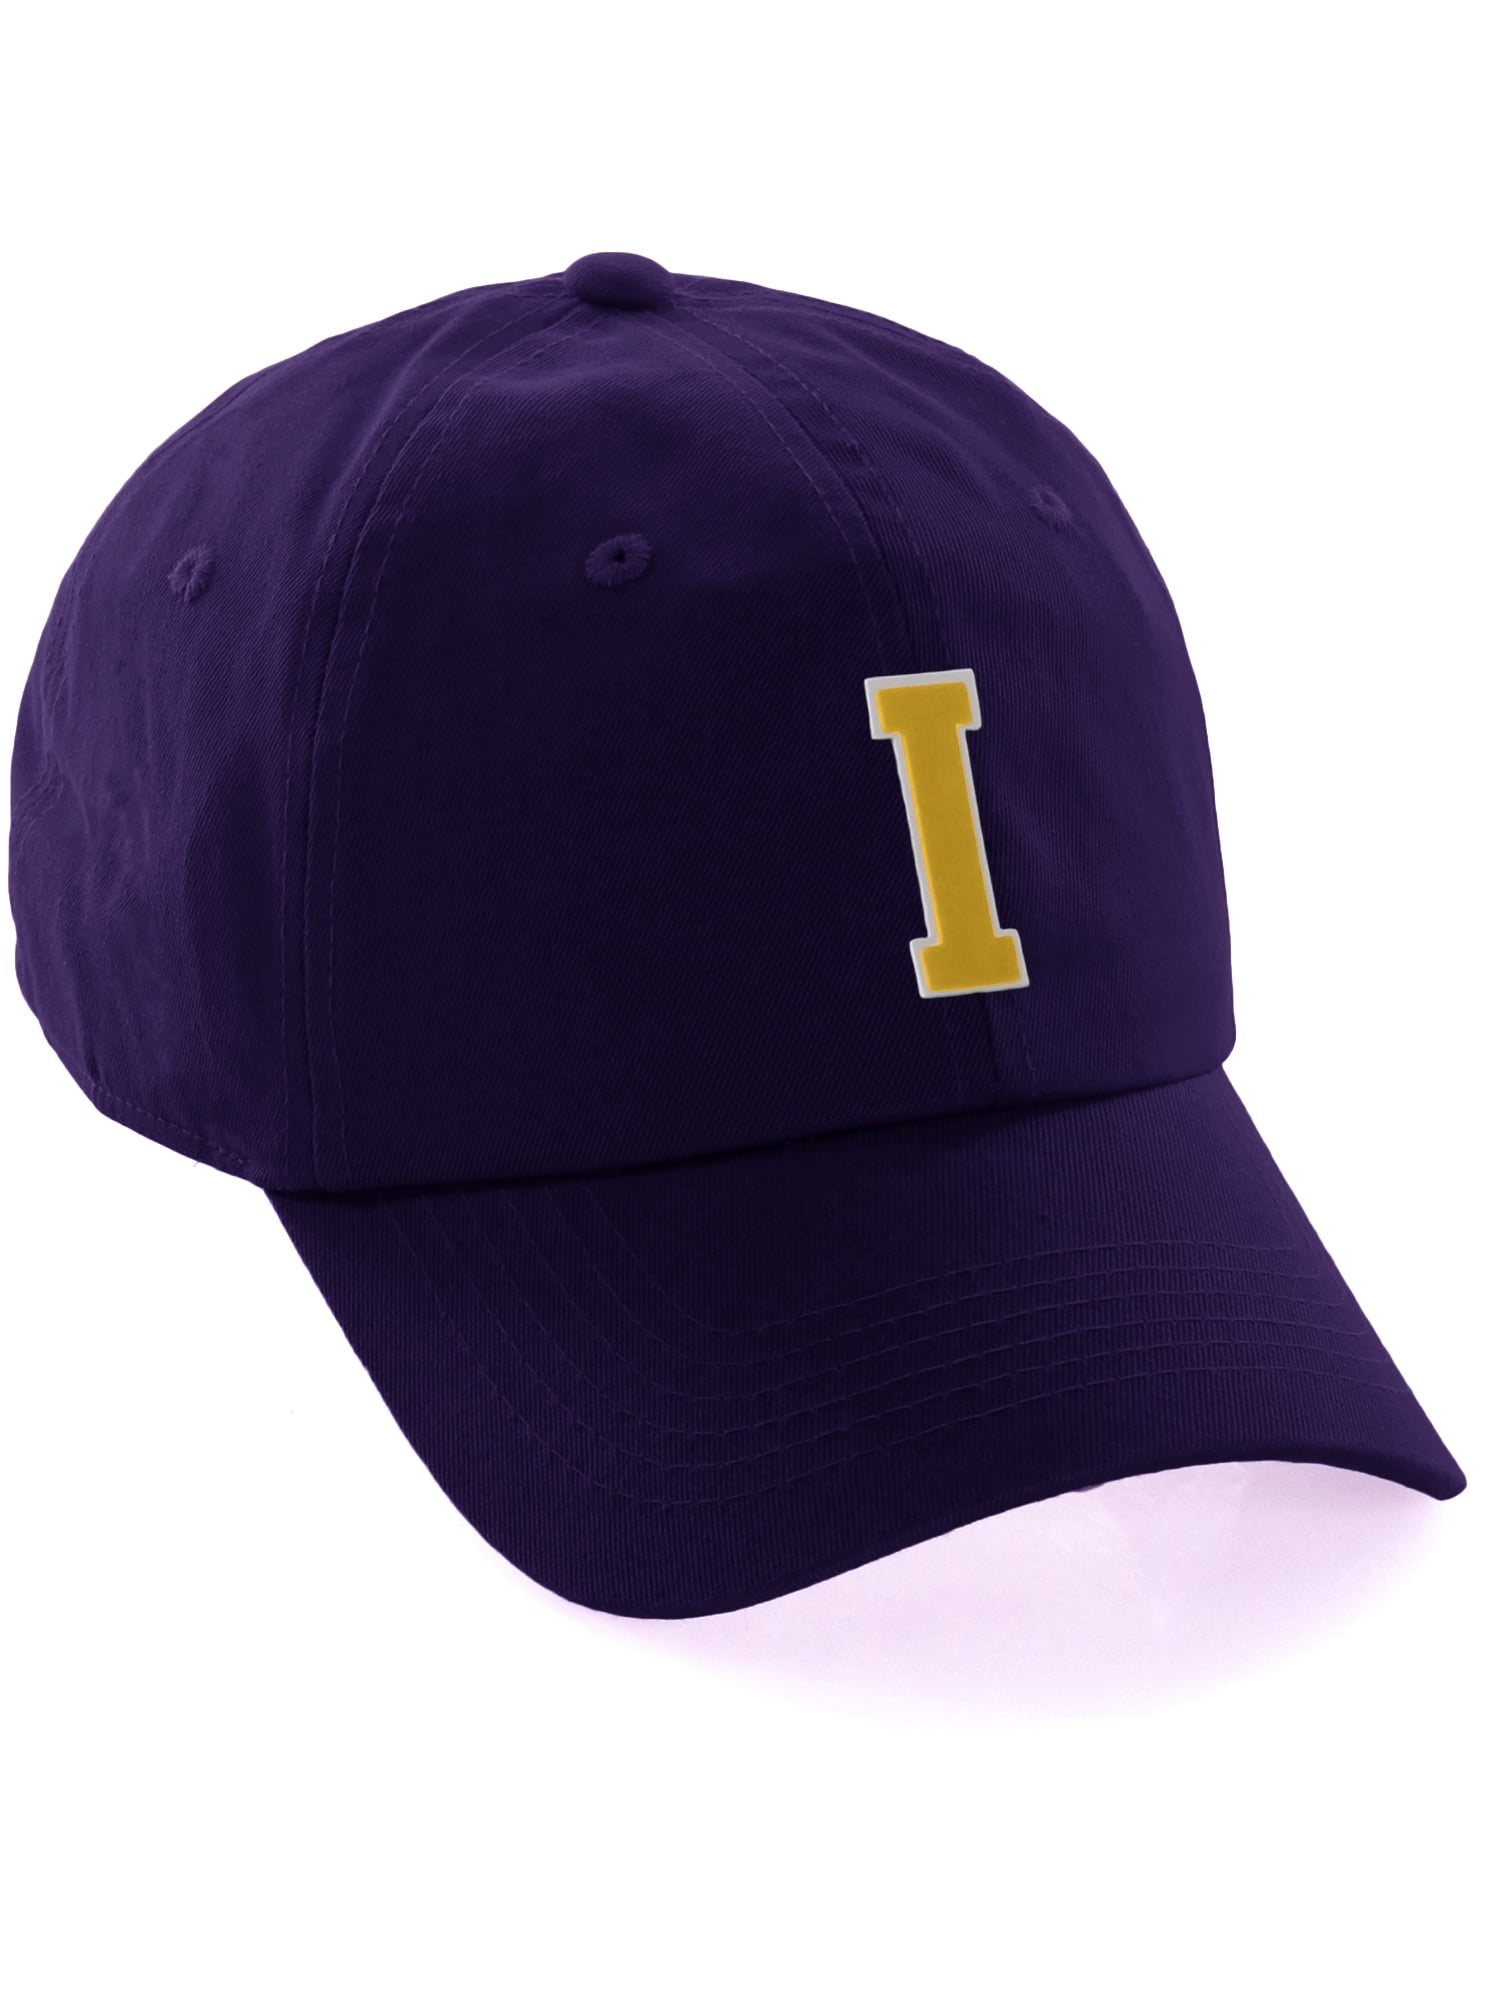 Baseball Z White to Purple Letter A Intial Cap M Letter Colors, Hat Team Customized Gold